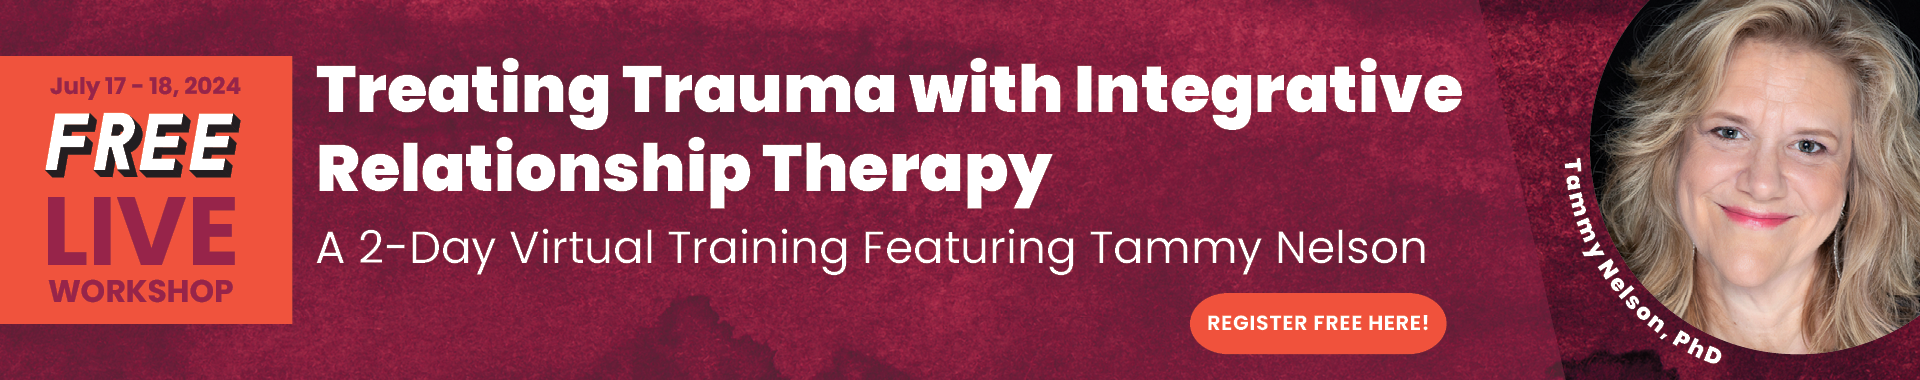 Treating Trauma with Integrative Relationship Therapy: A 2-Day Virtual Training Featuring Tammy Nelson